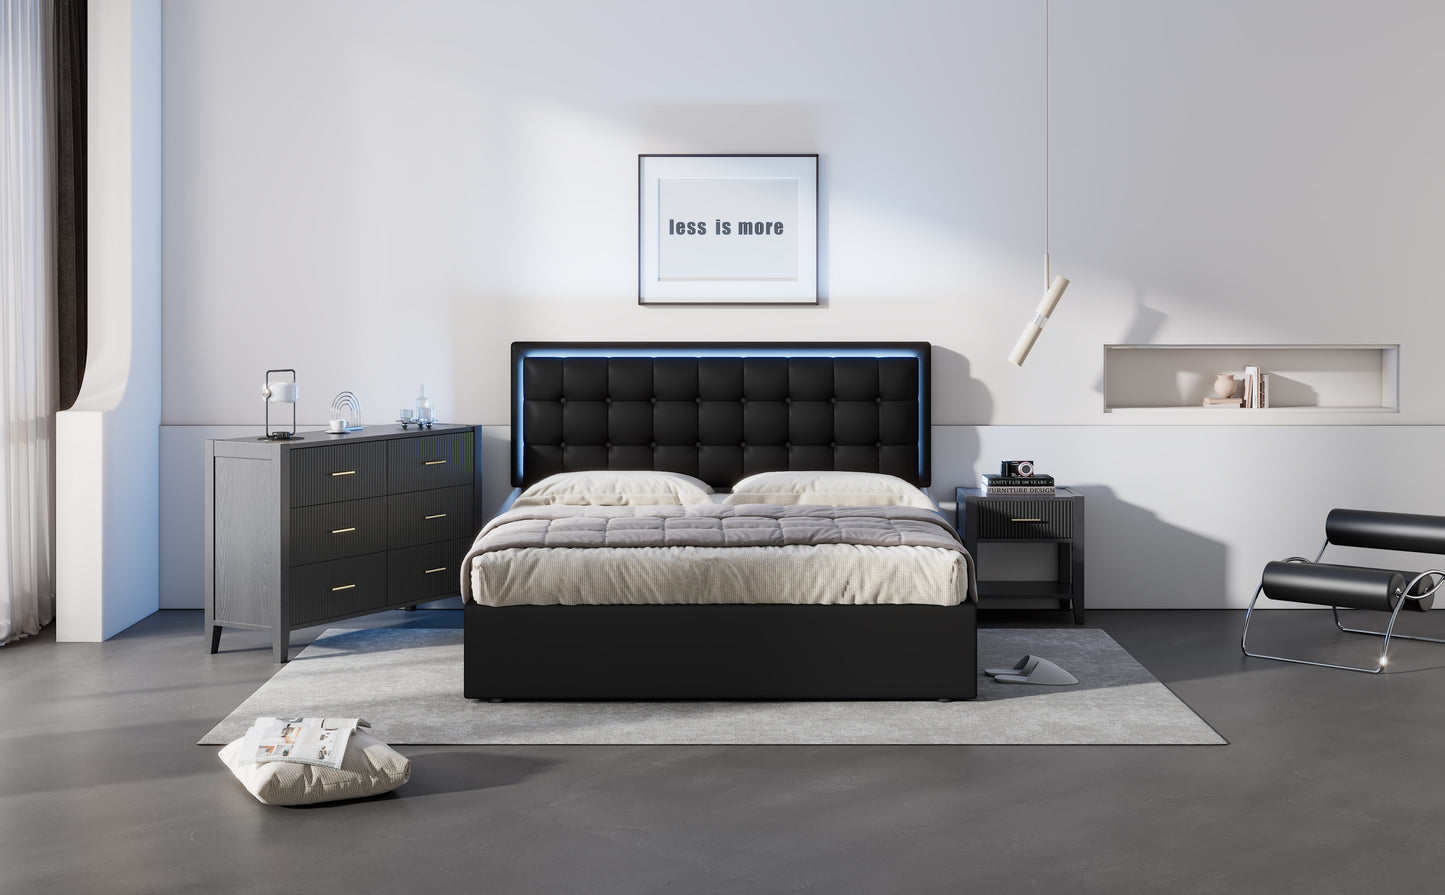 3-Pieces Bedroom Sets Queen Size Tufted Upholstered PU Platform Bed with Nightstand and Storage Dresser, Black